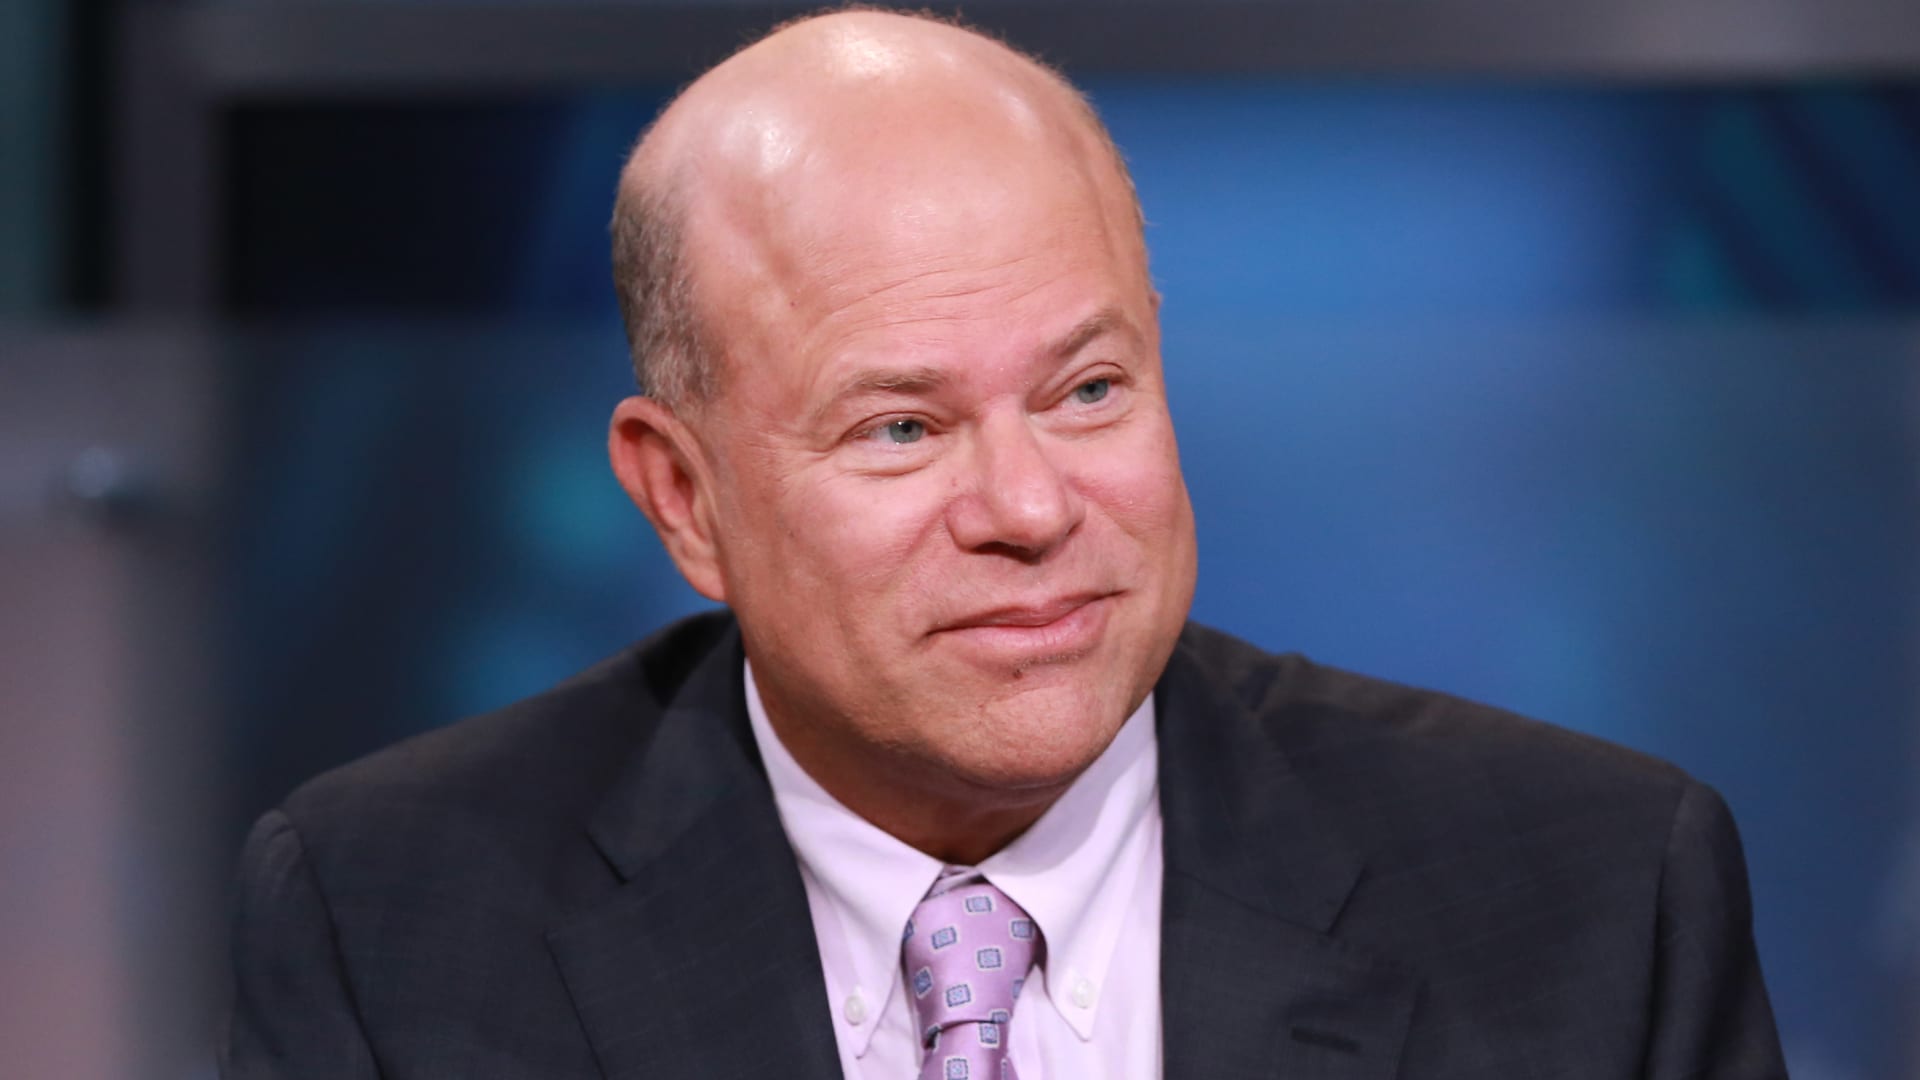 David Tepper’s Appaloosa hedge fund raises Uber stake, adds small bet on Cathie Wood’s innovation fund